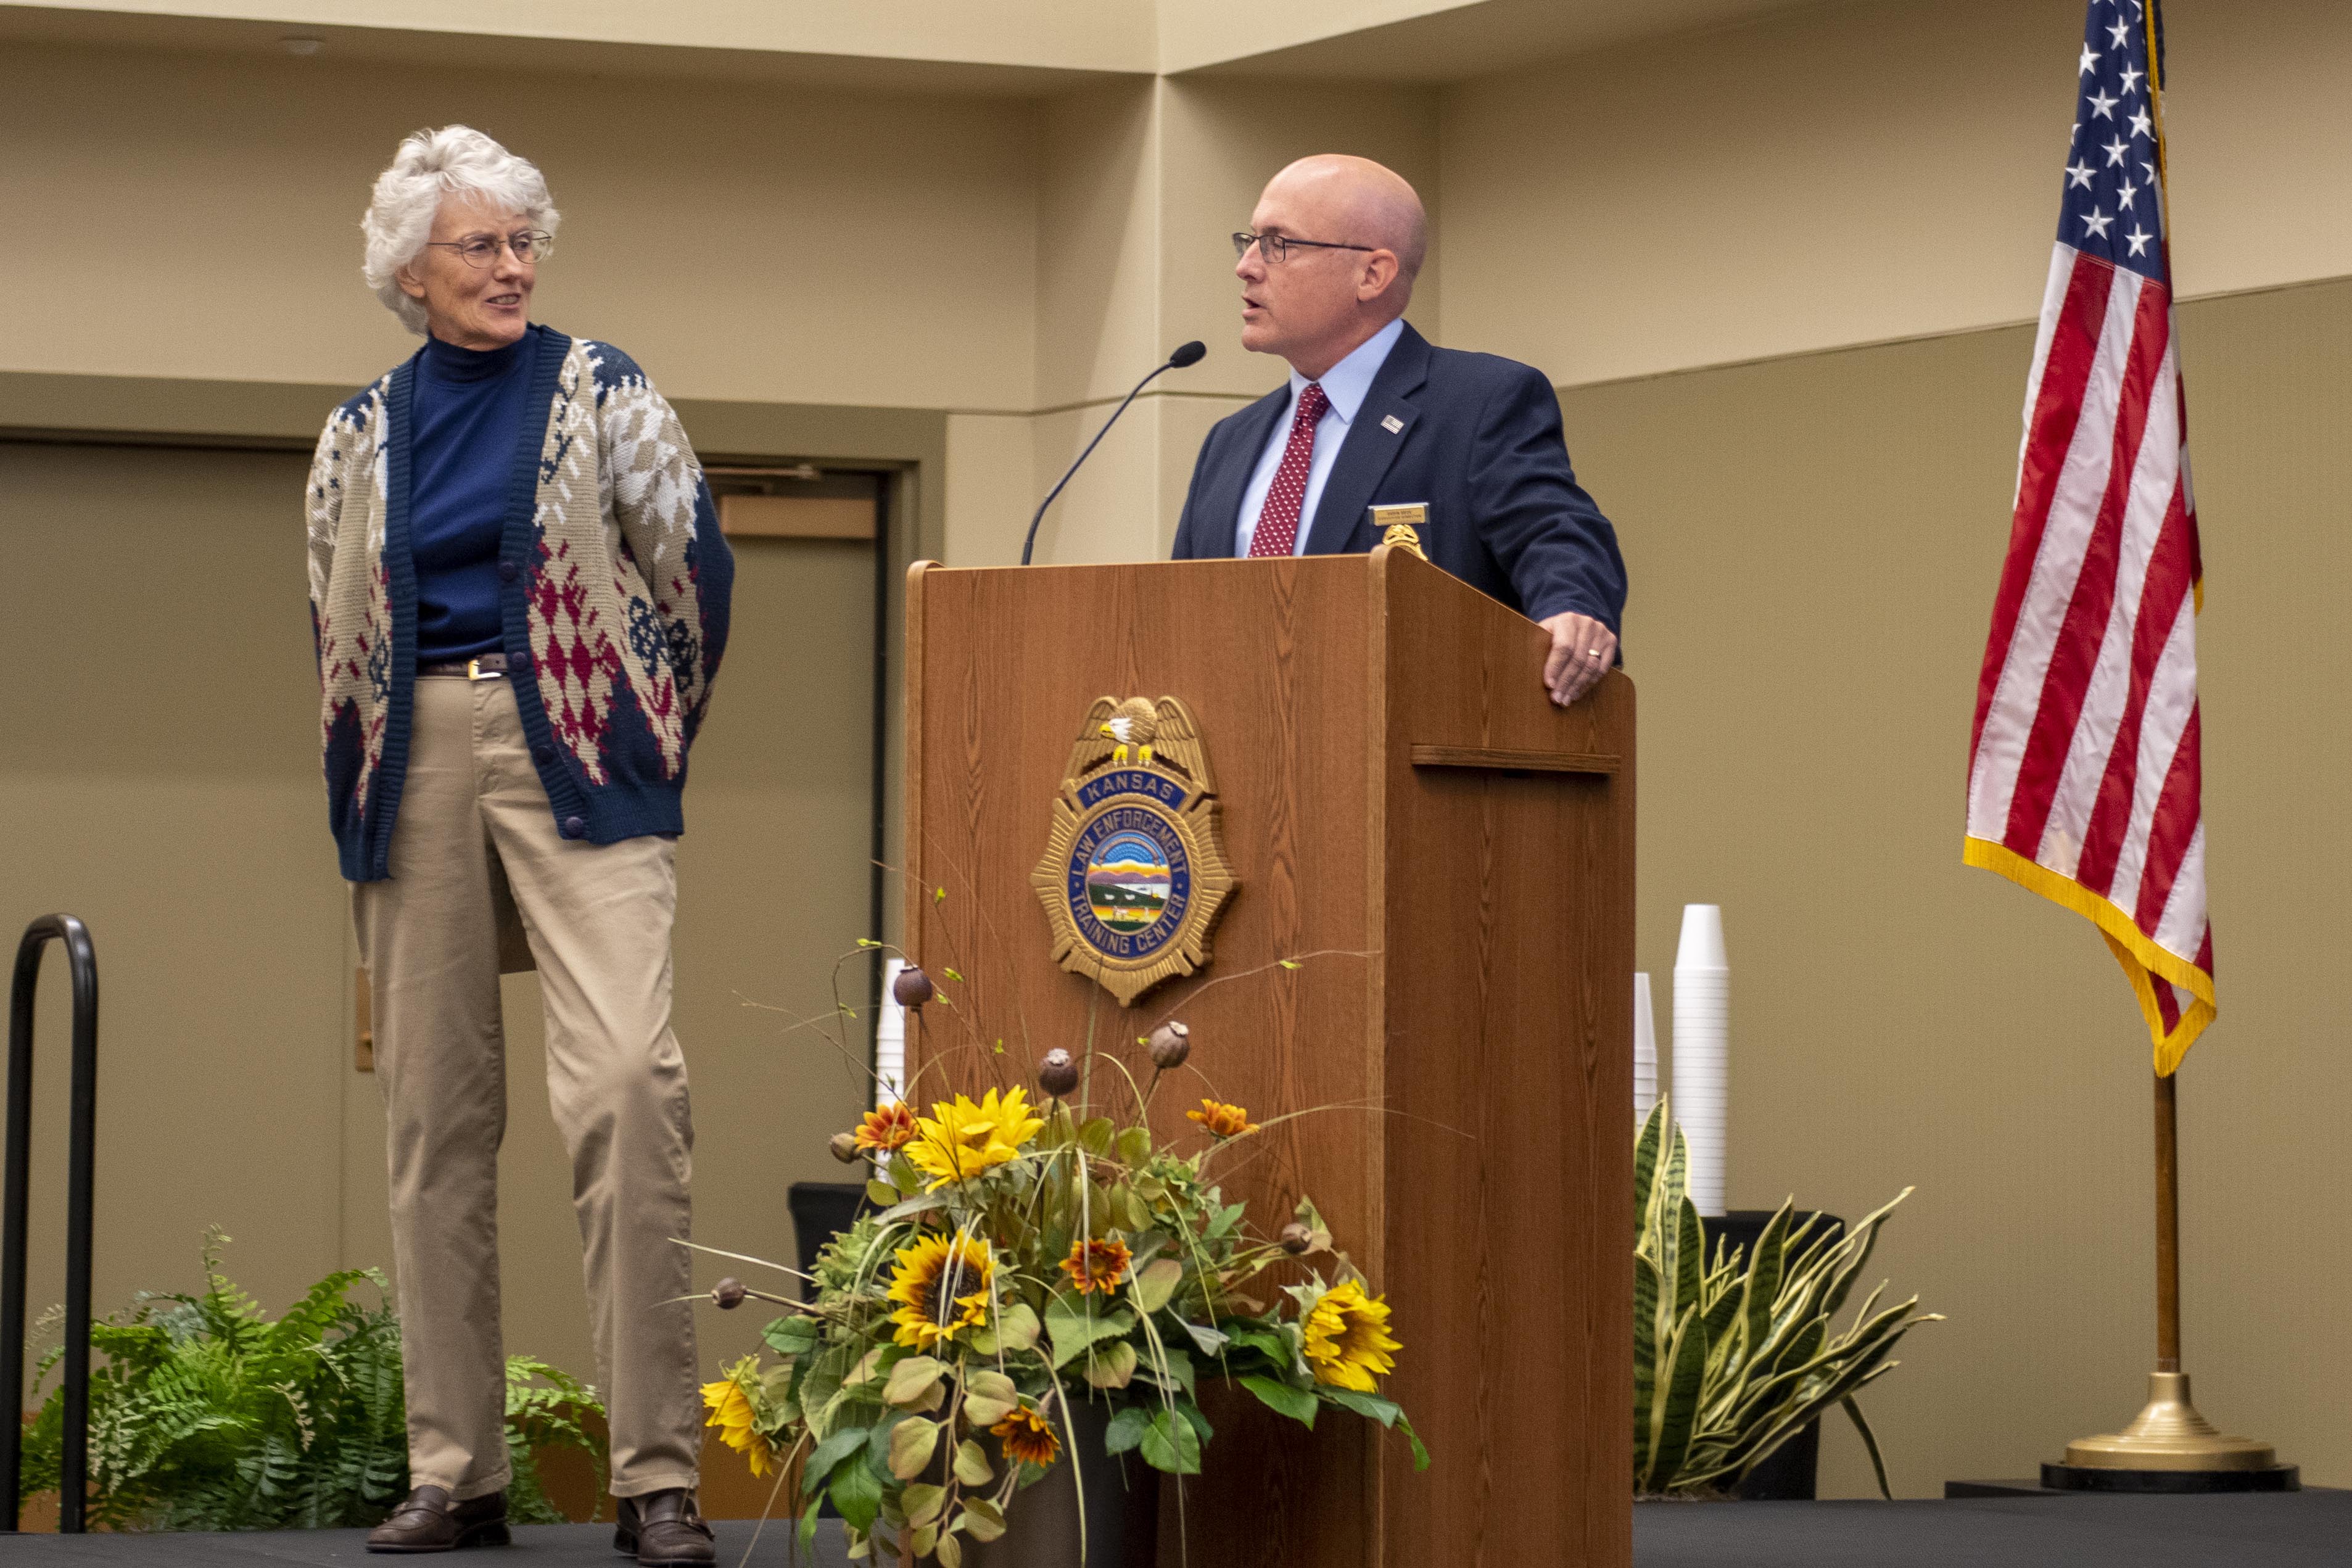 KLETC Executive Director Darin Beck delivers remarks at Beckie Miller's retirement celebration before presenting her a letter from KU Provost Carl Lejuez and Chancellor Douglas A. Girod granting her Emeritus status.